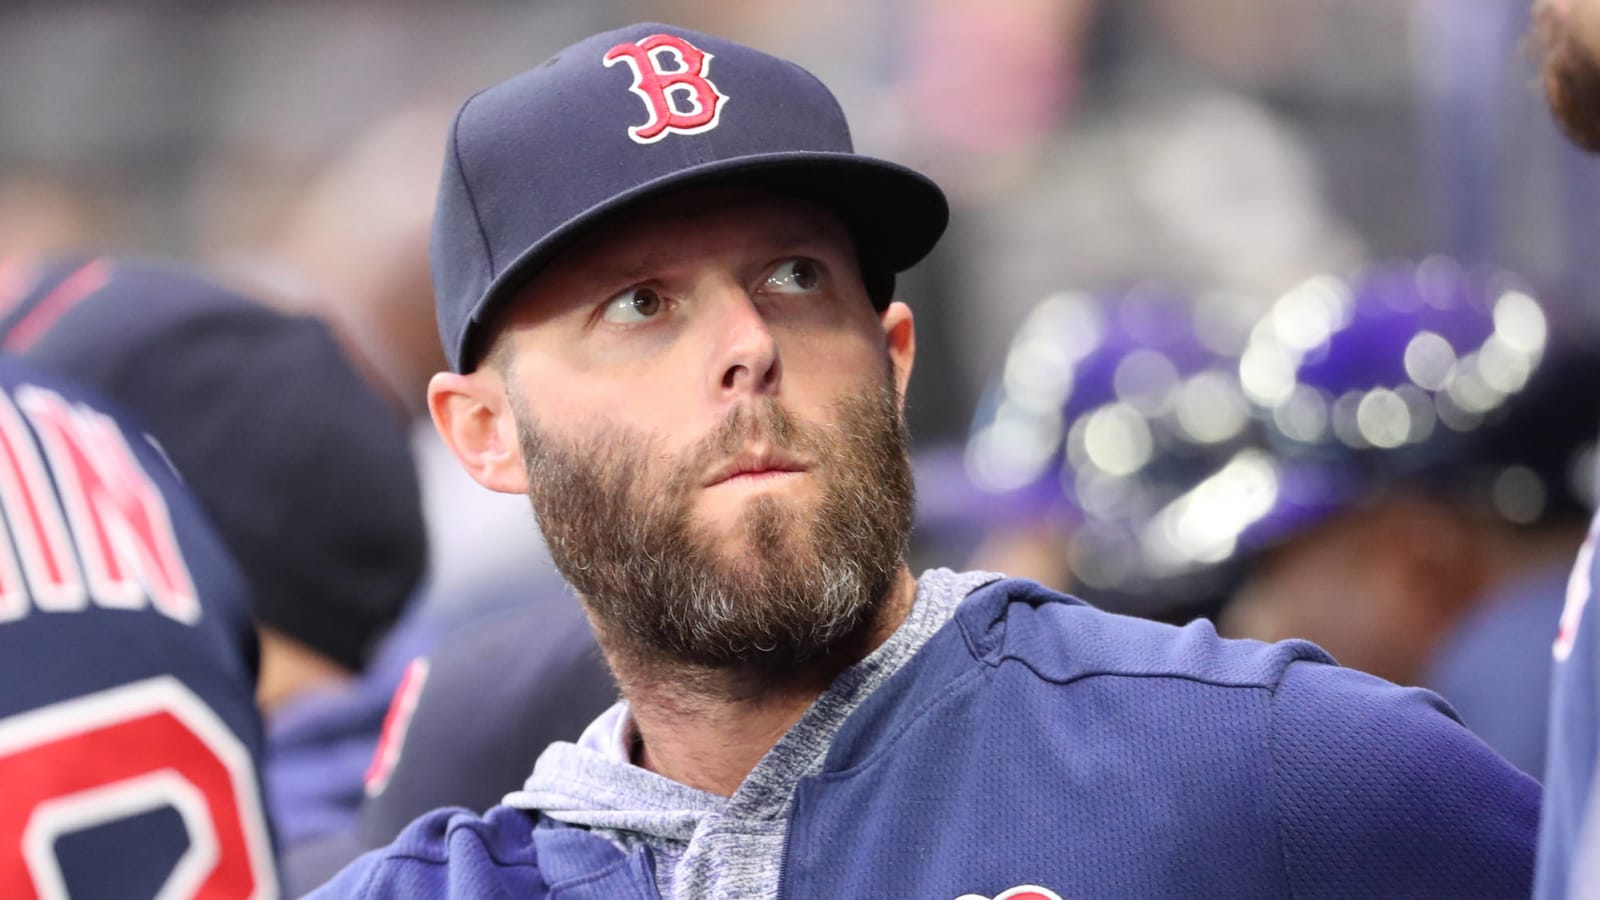 Newly retired Dustin Pedroia underwent partial knee replacement in December